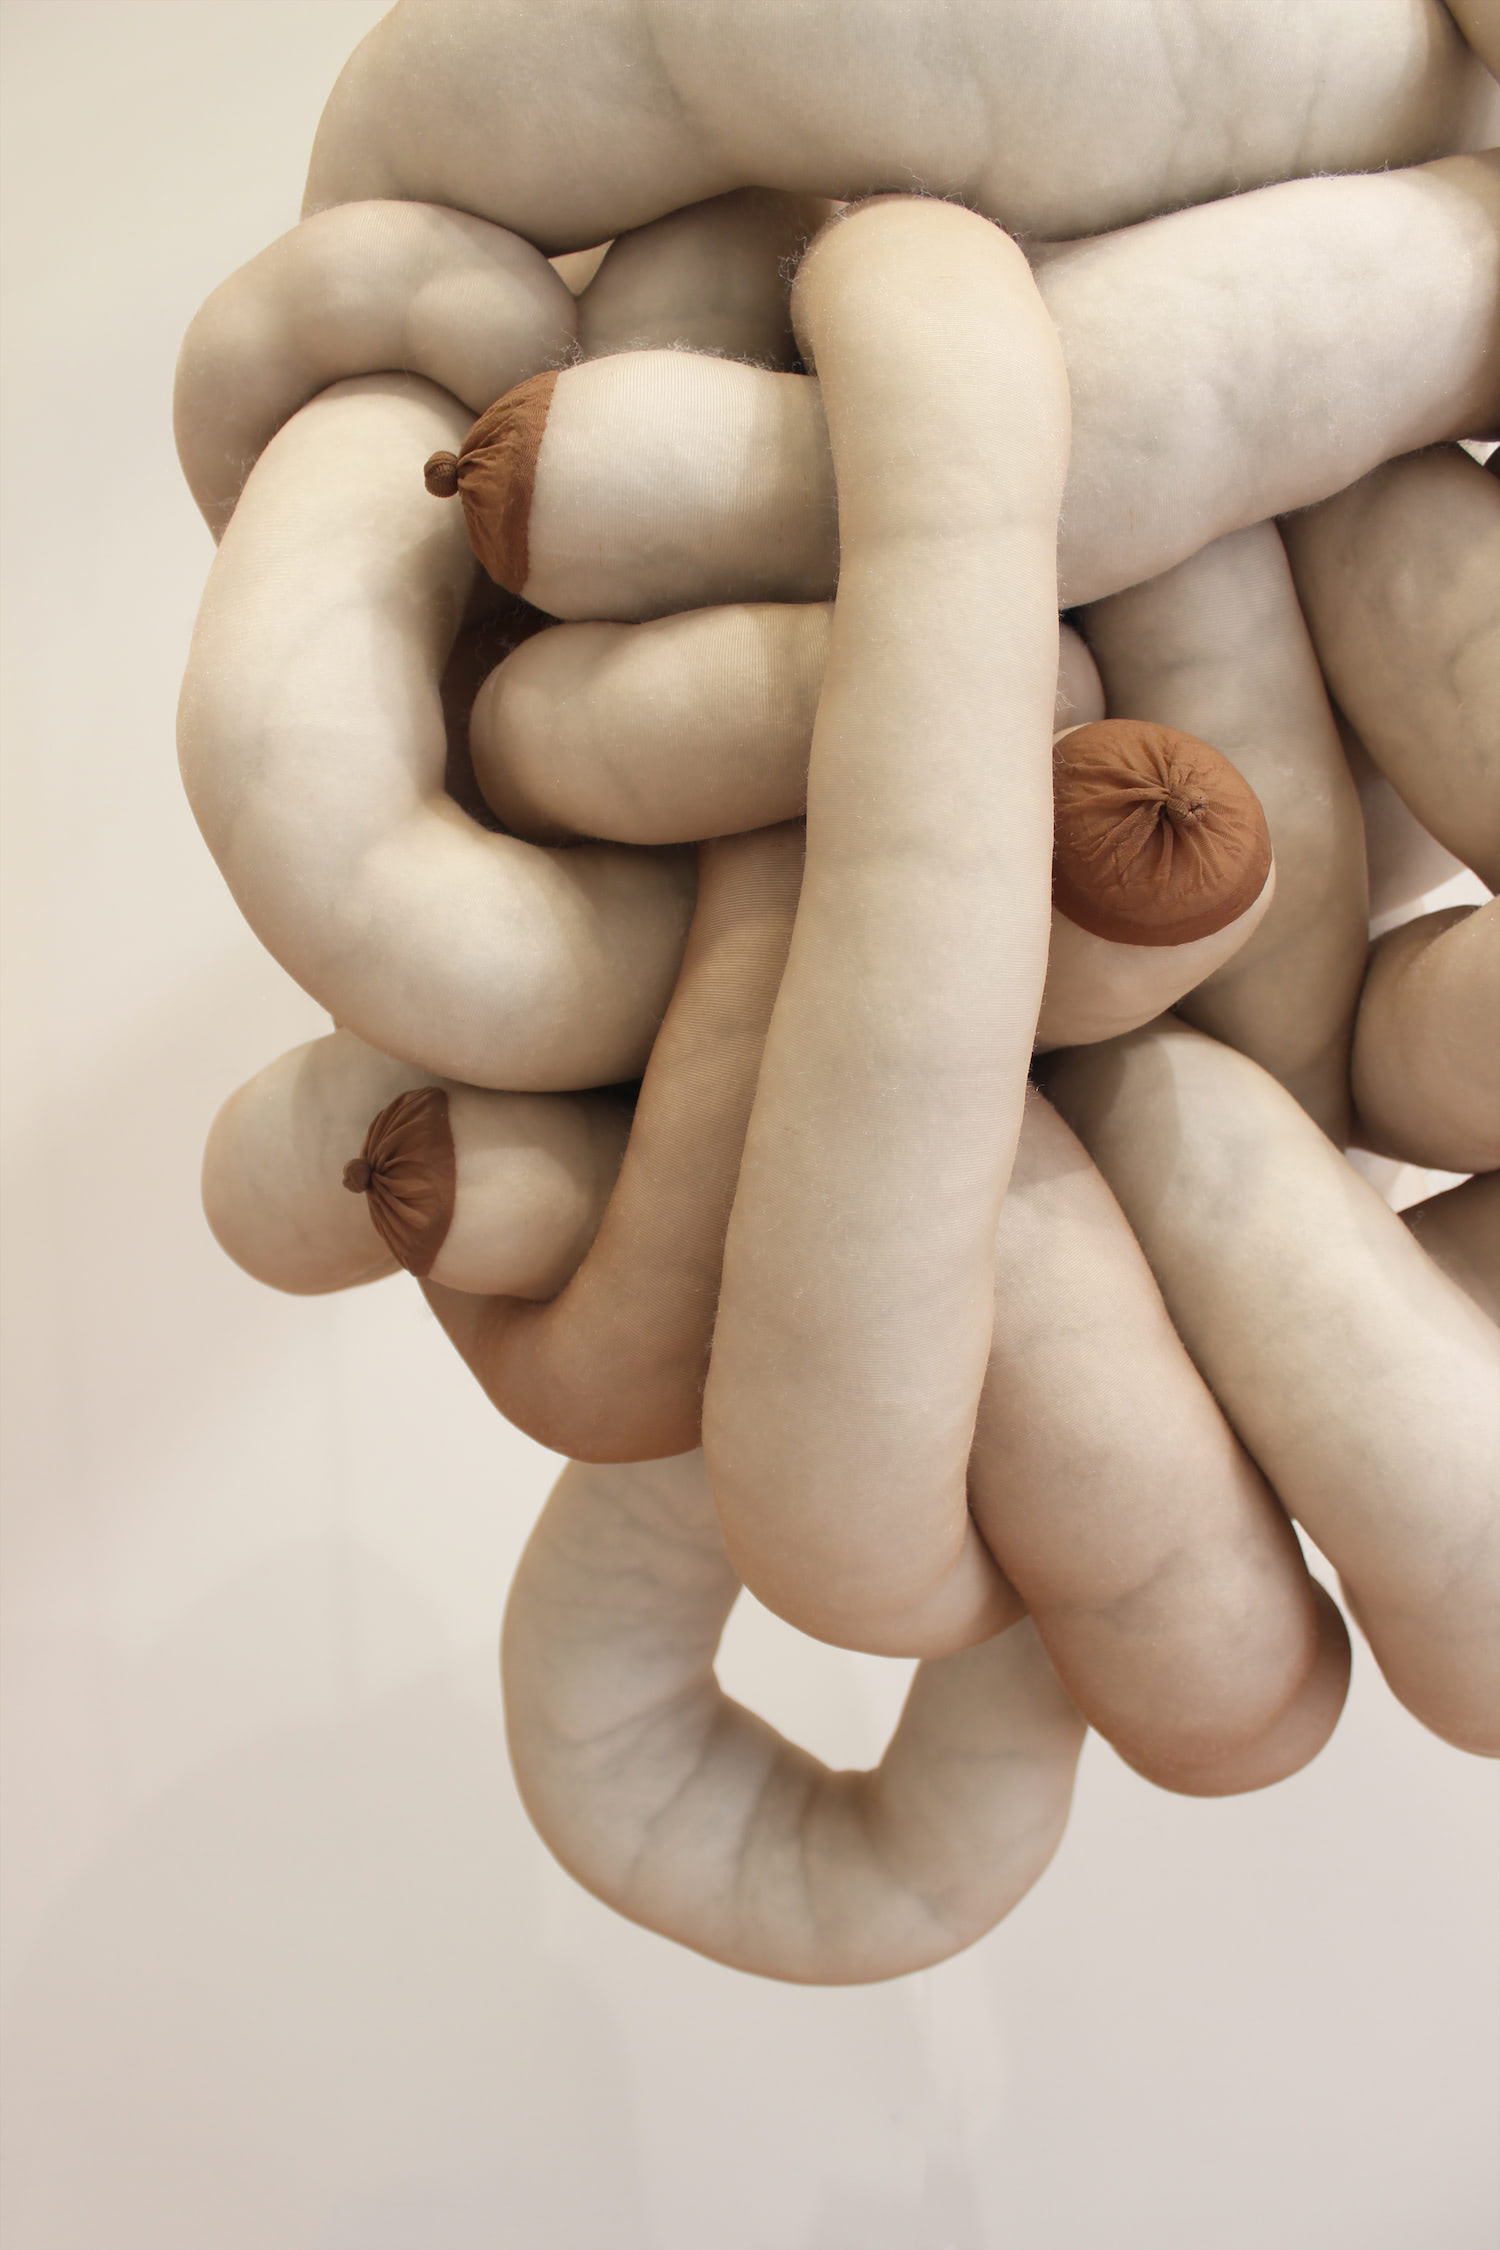 A close-up image of the knotted soft sculpture. It shows the ripples on the nipples, texture from the poly-fil, and curves of the individual soft sculpture forms.